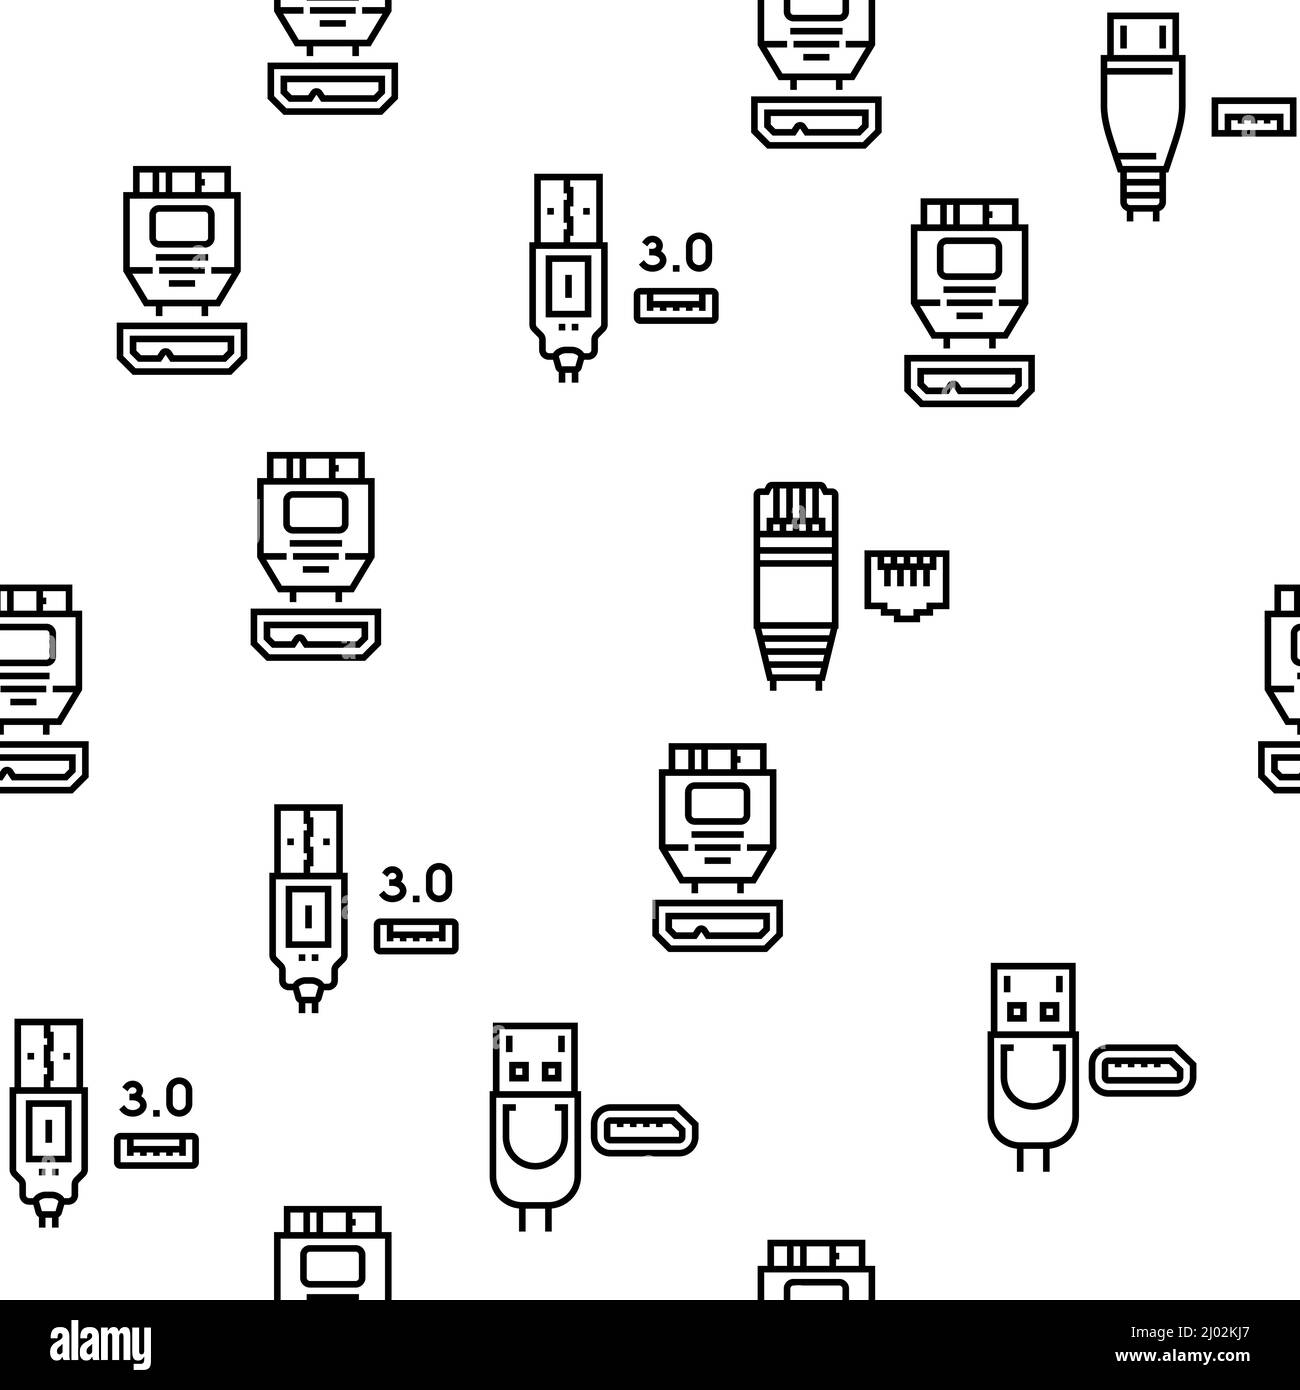 Usb Cable And Port Purchases Vector Seamless Pattern Stock Vector Image &  Art - Alamy